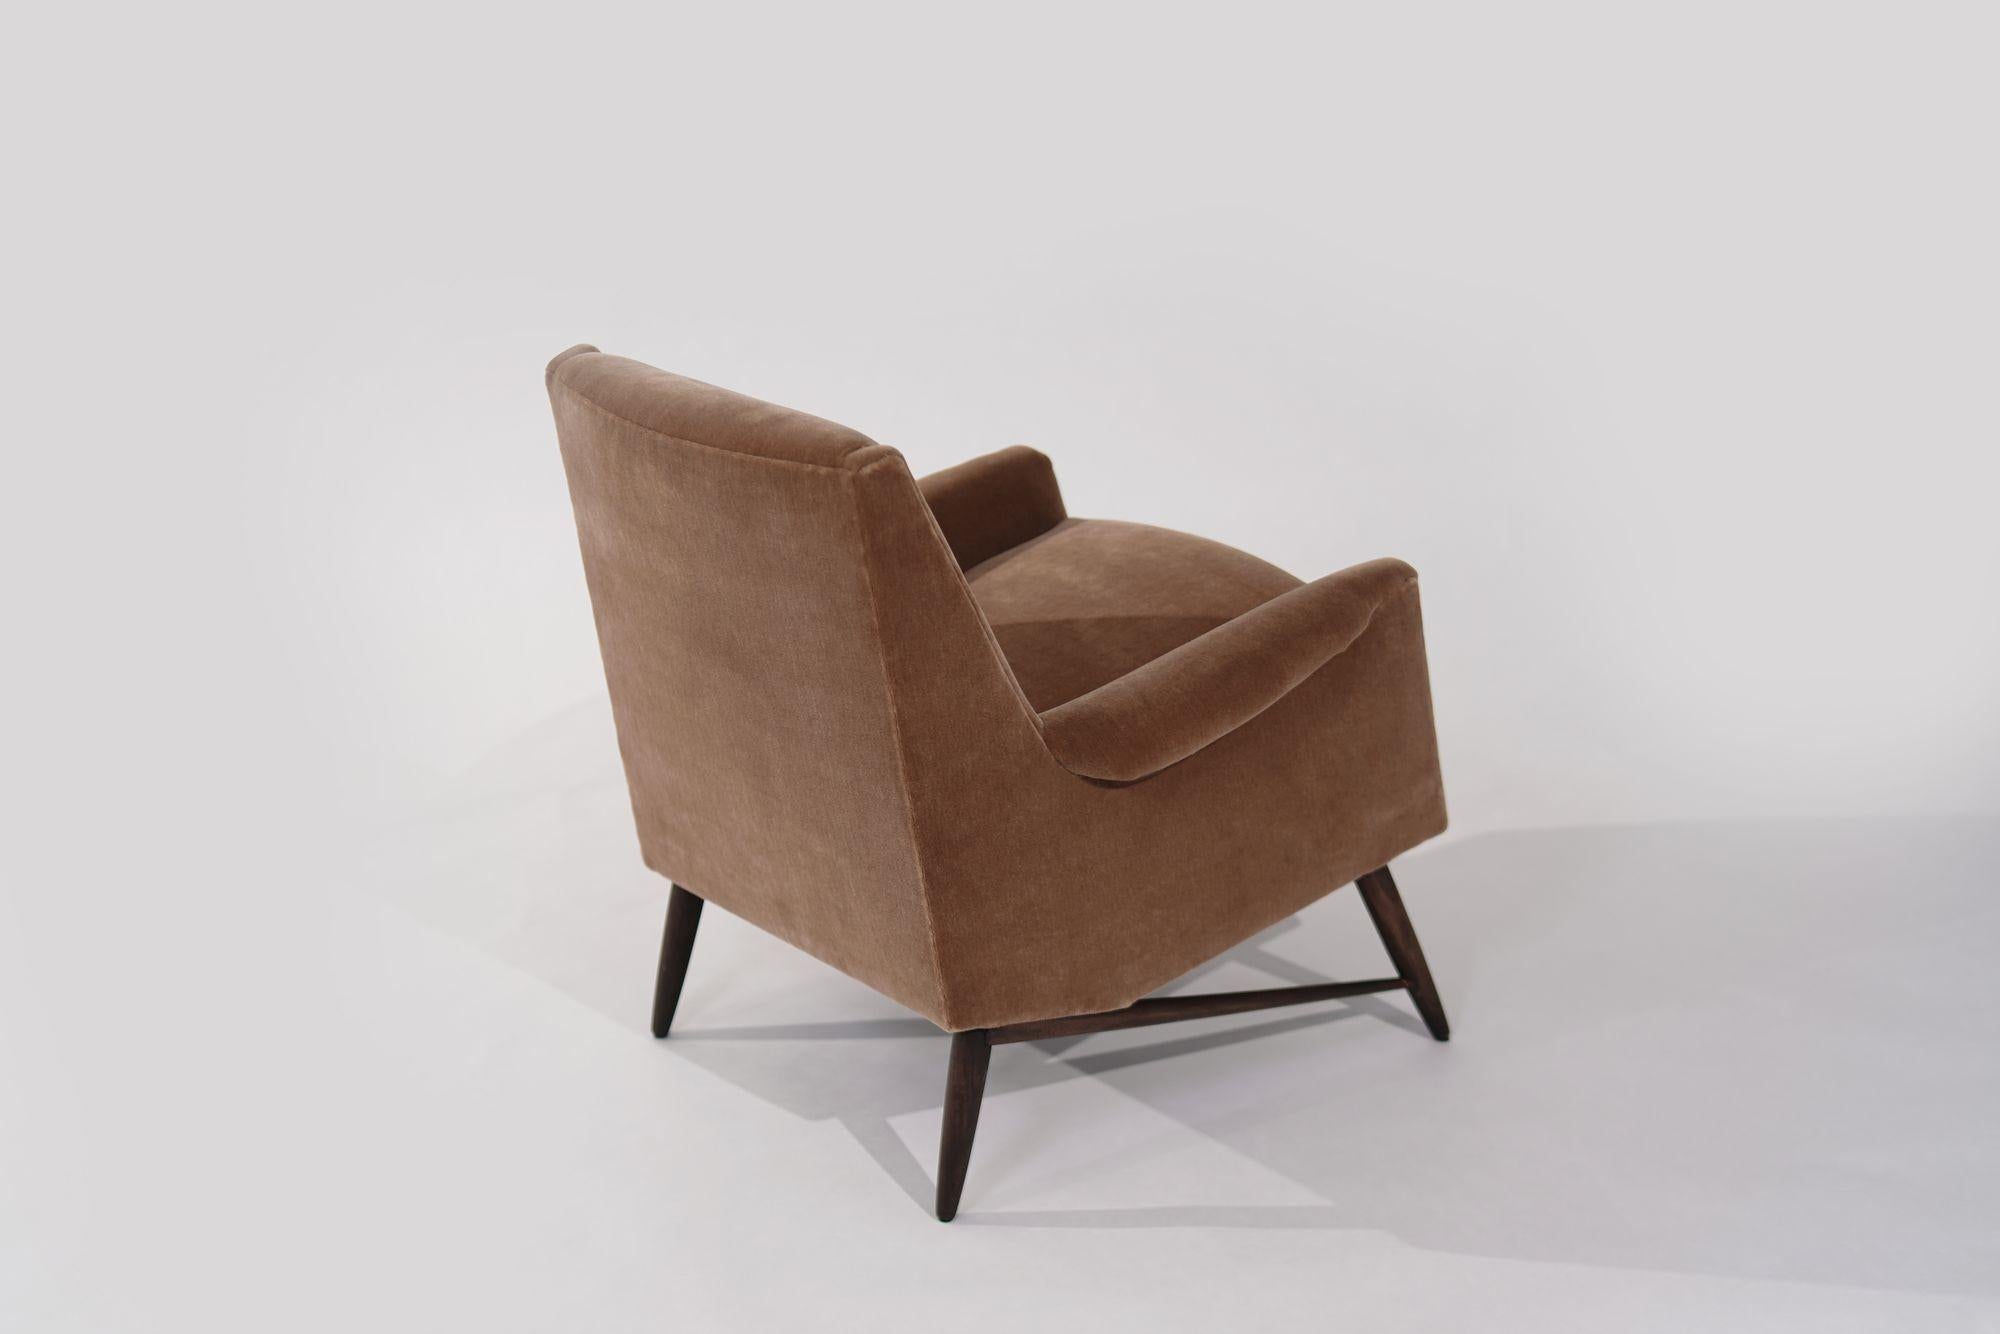 Discover timeless elegance with this Scandinavian-Modern lounge chair from the 1950s. Meticulously restored and reupholstered in luxurious gold mohair, it epitomizes mid-century charm and sophistication. A statement piece for any room, blending